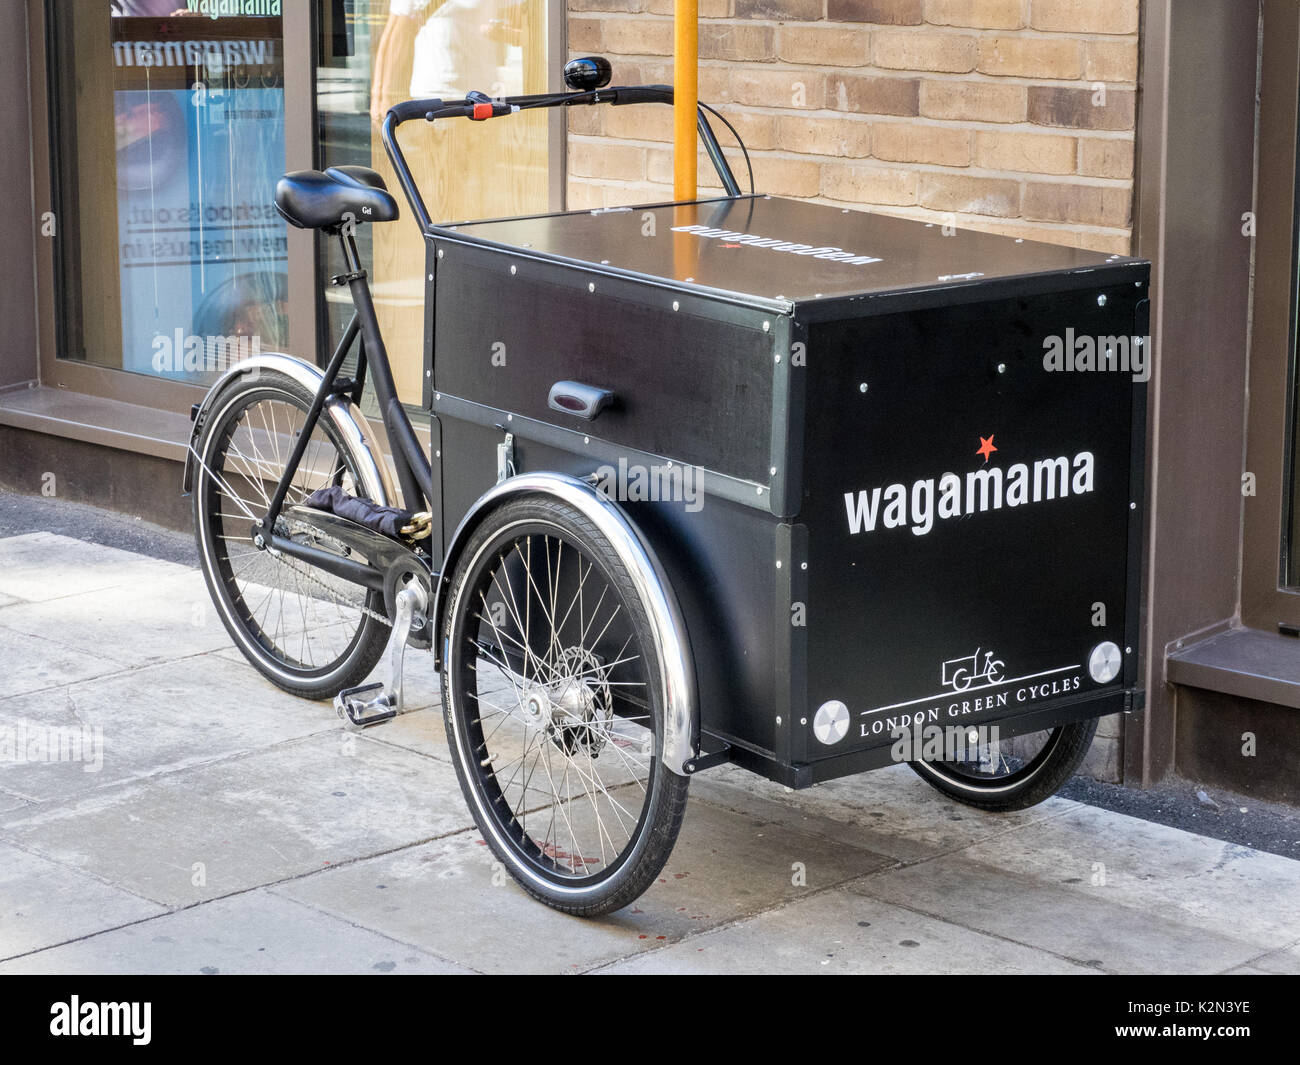 Cargo Bike for food deliveries from the Wagamama Asian Fusion food restaurant in Soho, central London UK Stock Photo